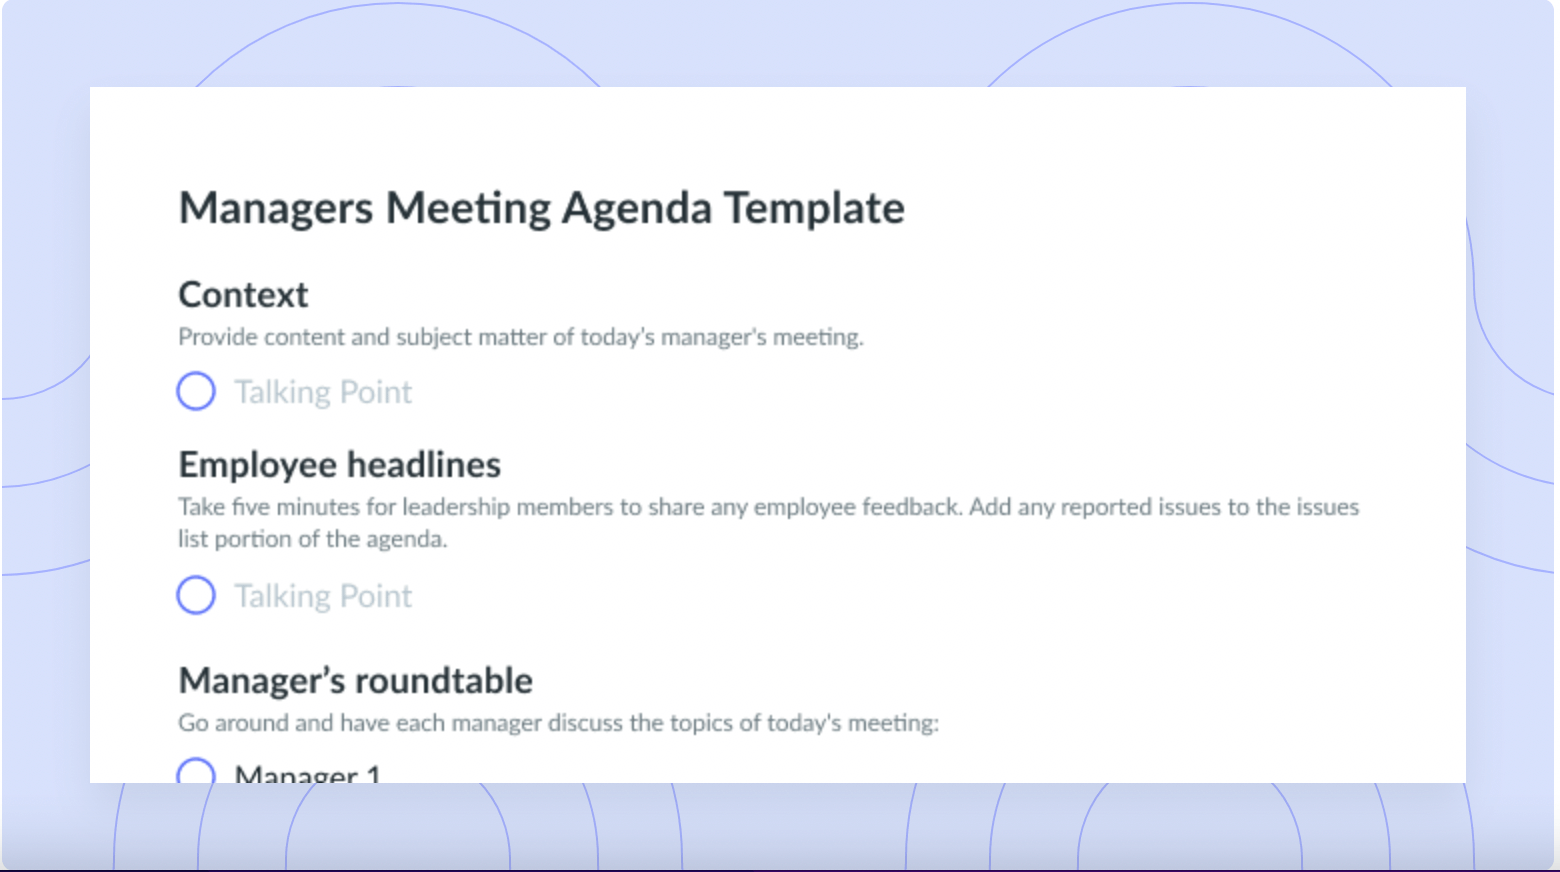 Managers Meeting Agenda Template